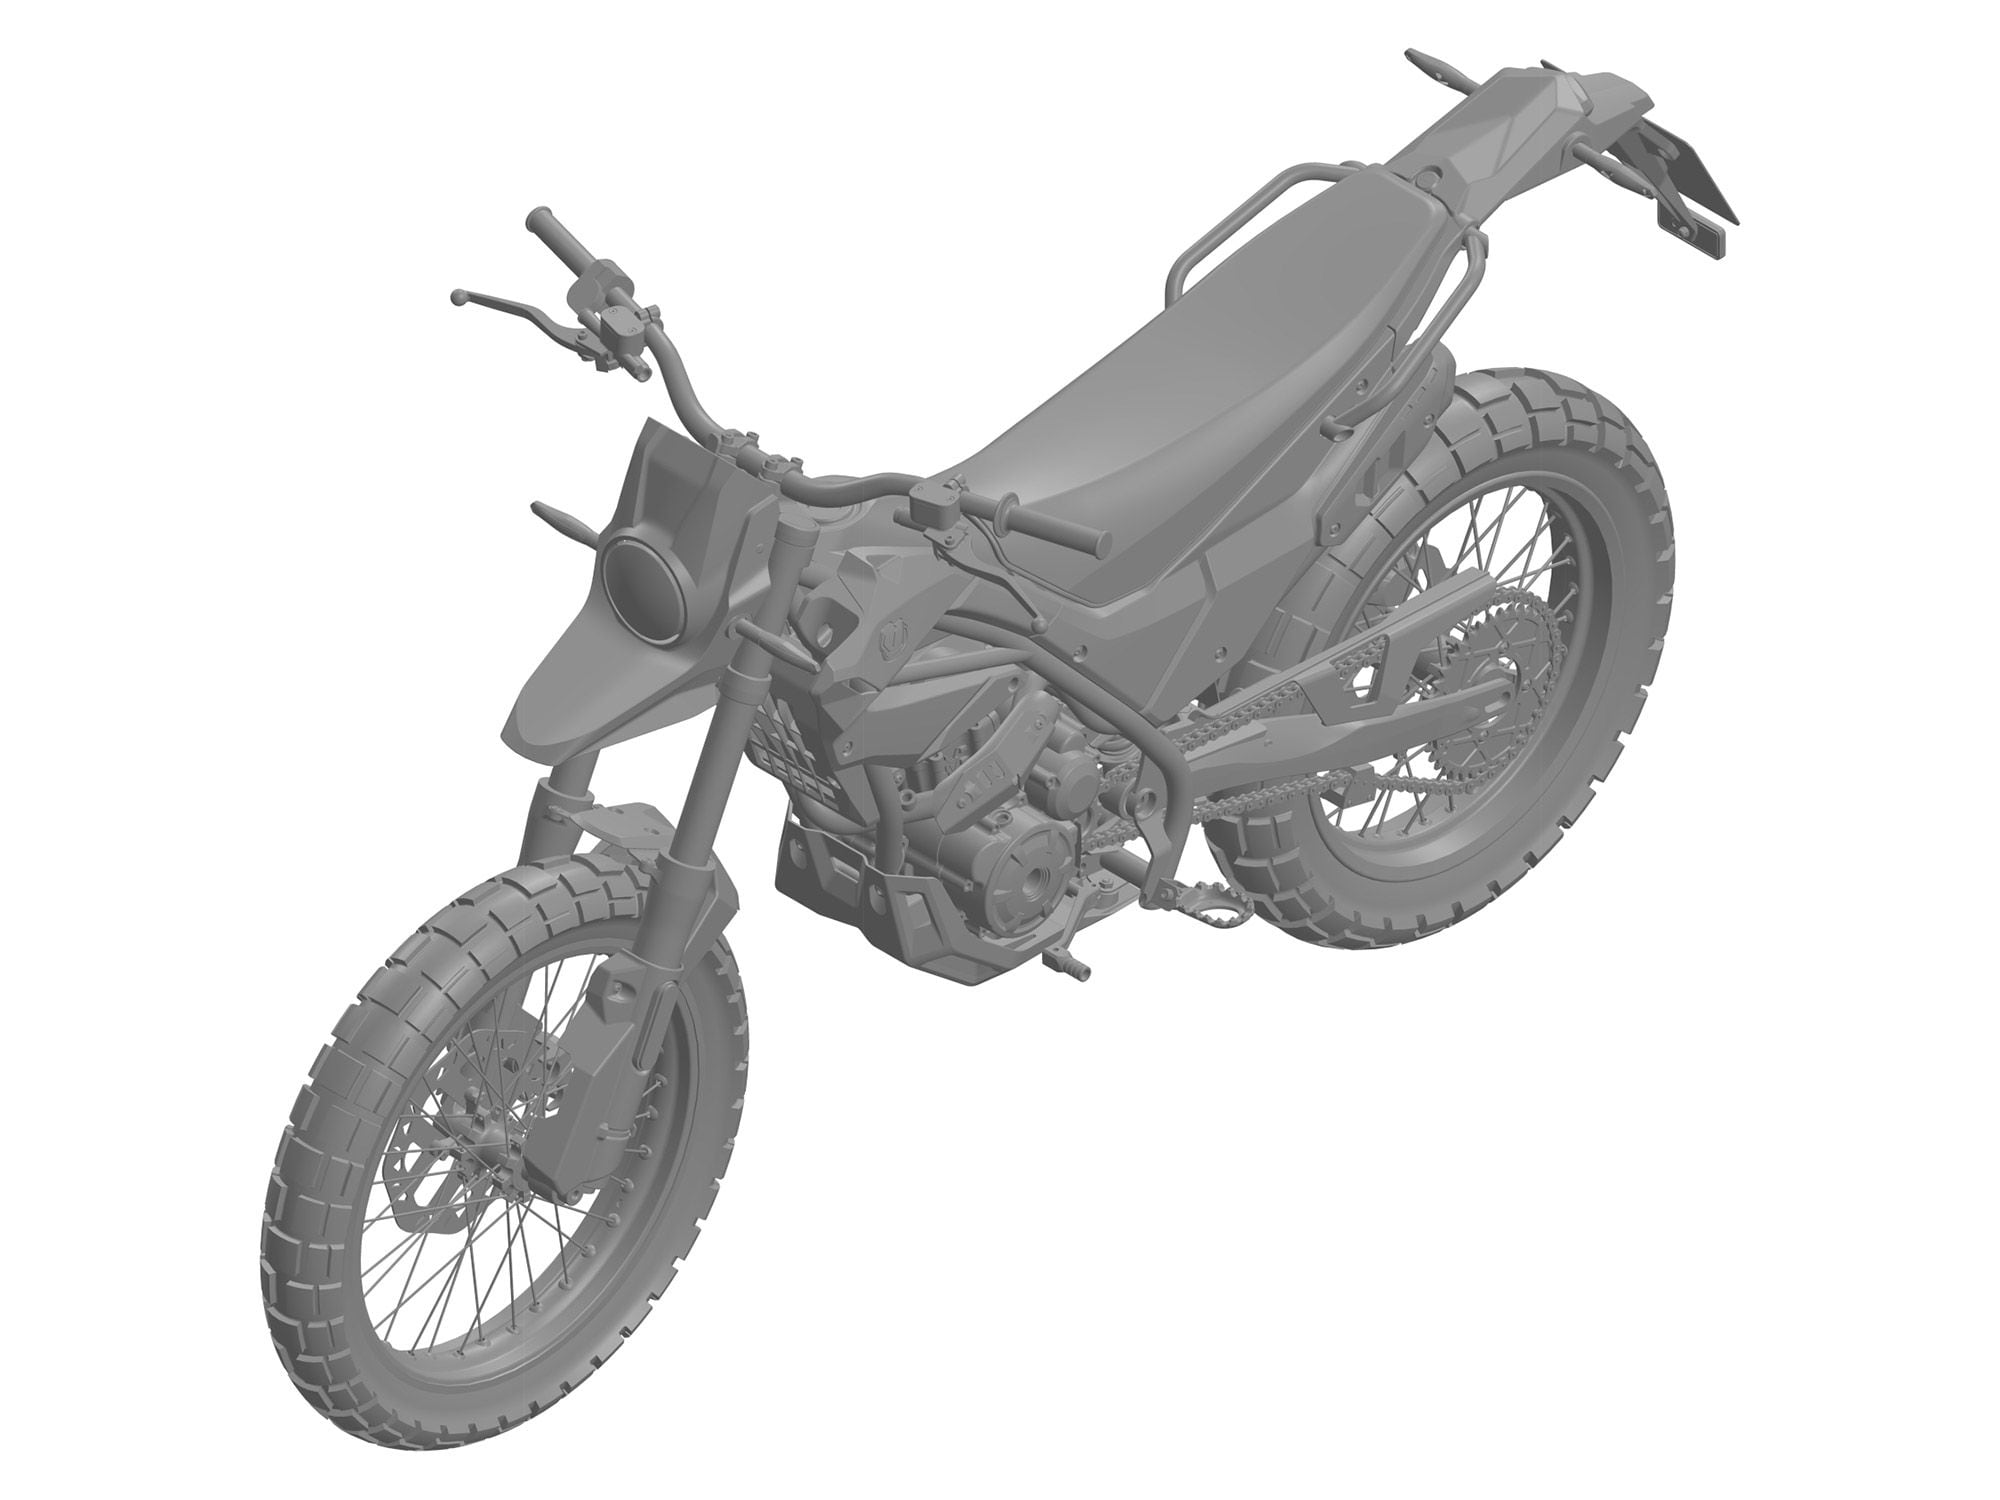 The CAD images show lots of details that suggest the bike is intended for the street, including lights, turn signals, and a license plate holder.